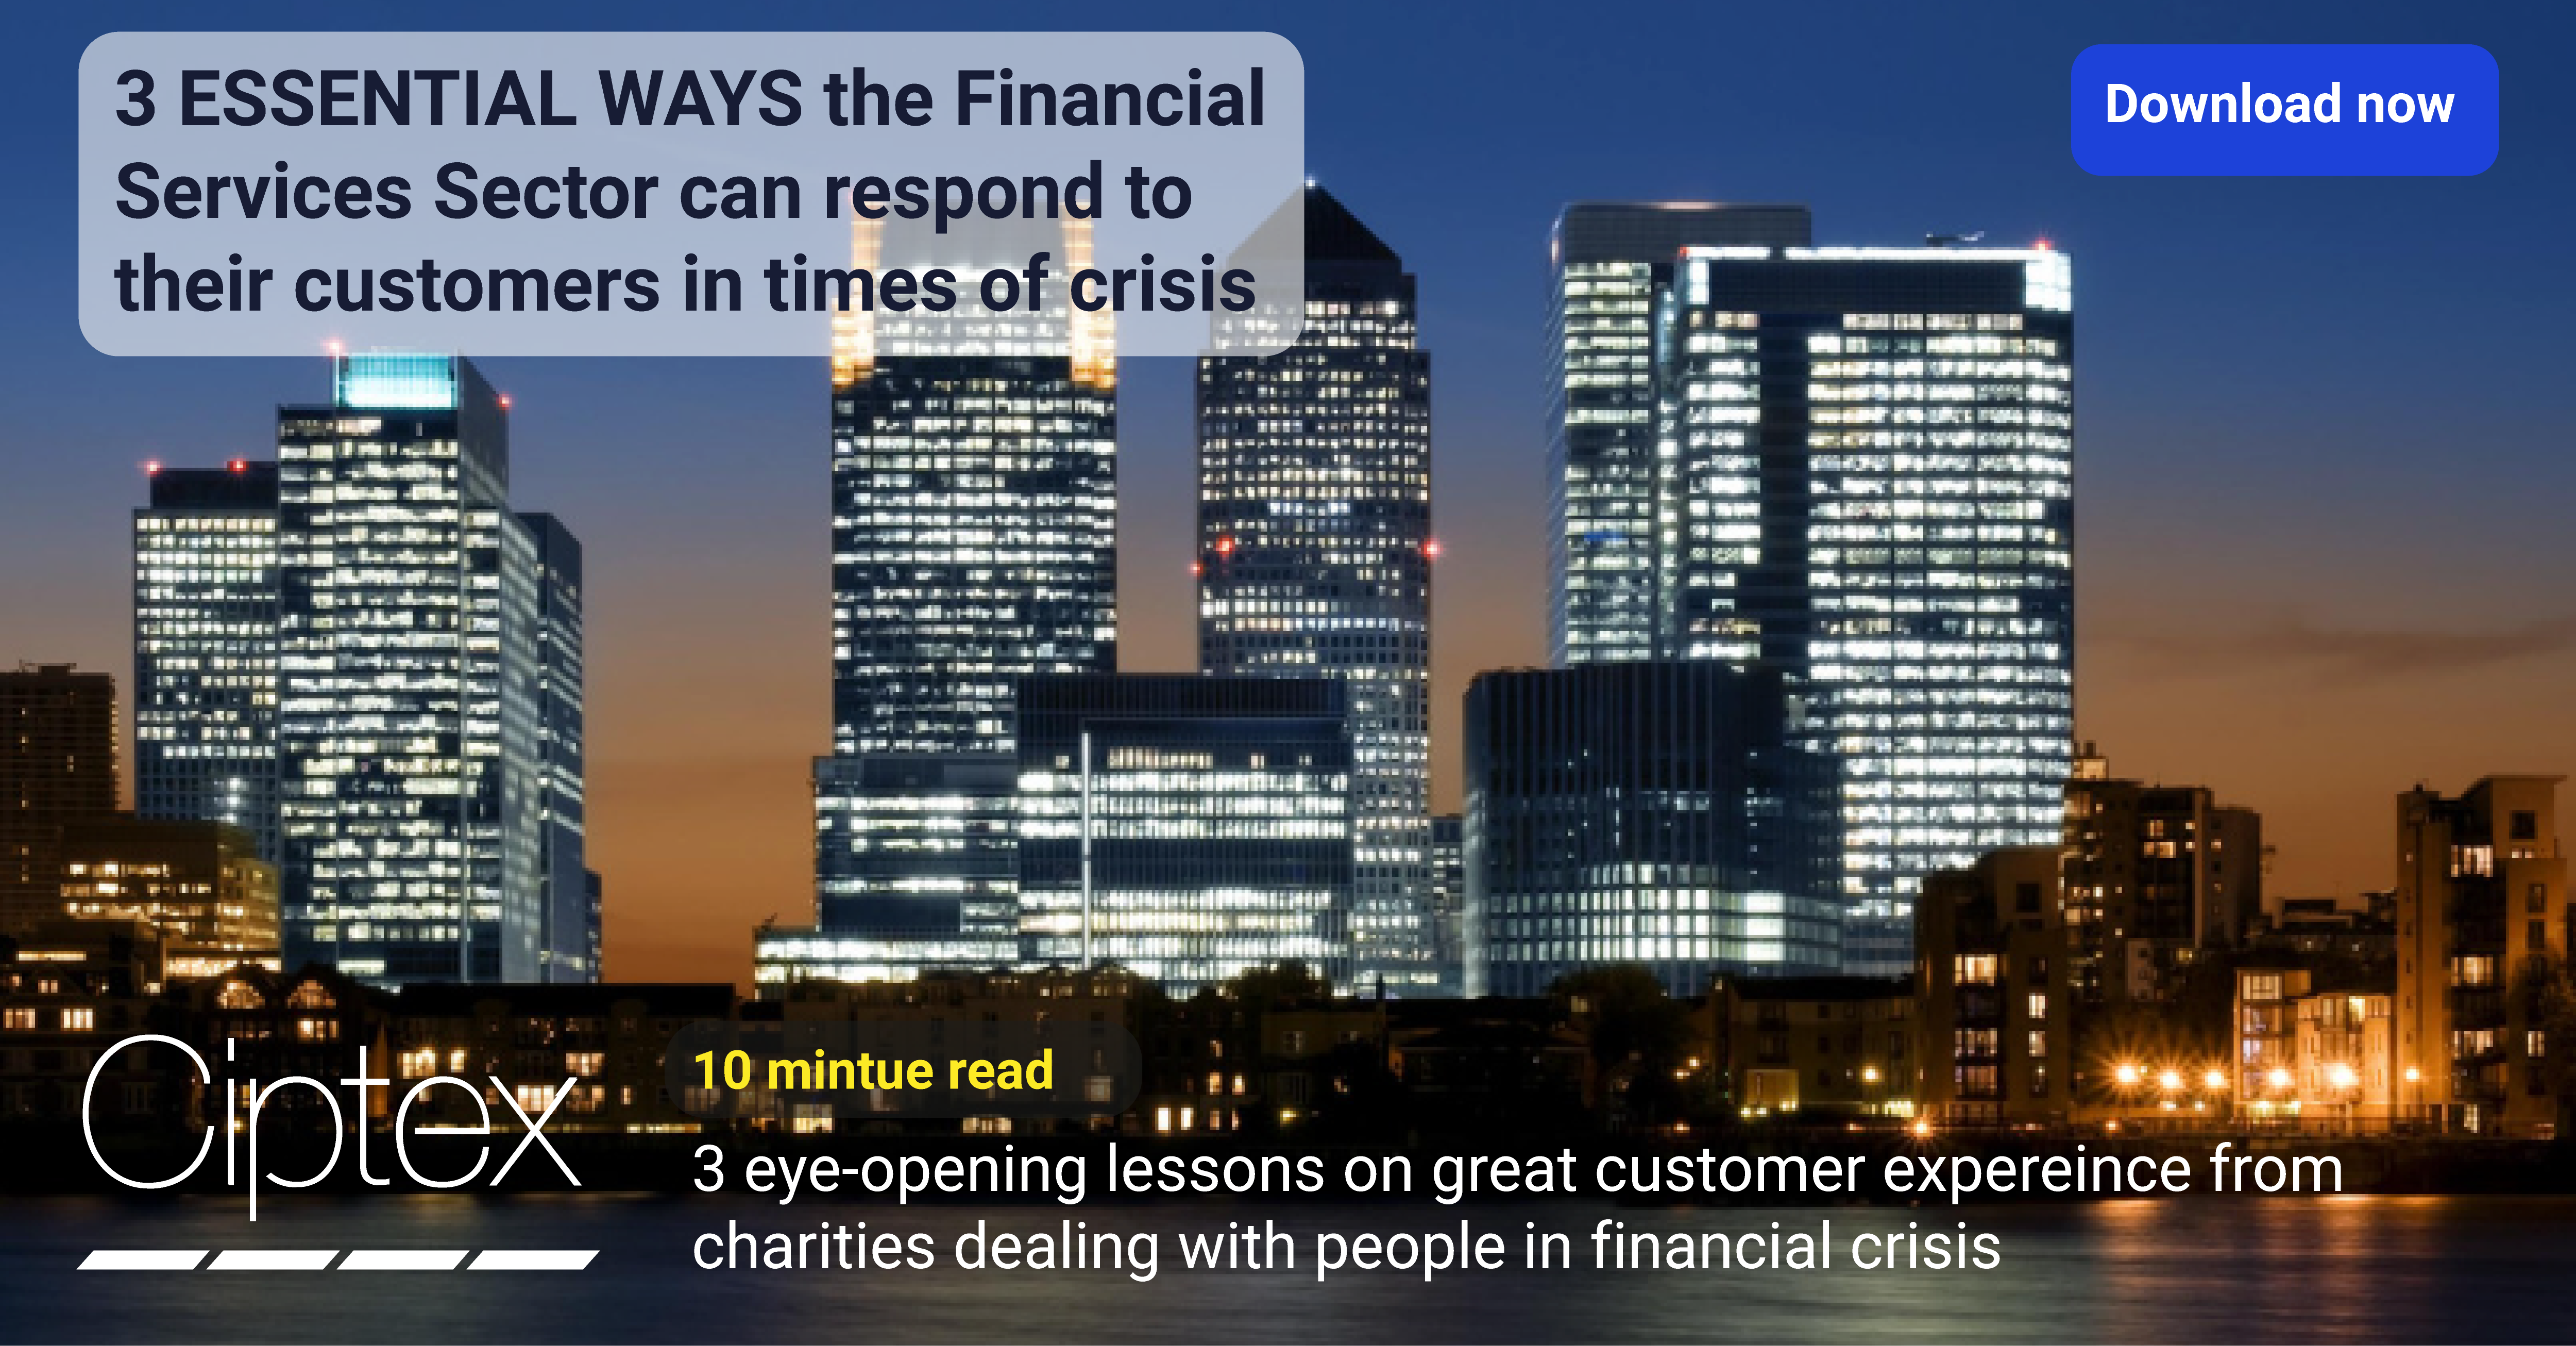 3 essential ways the financial services sector can respond to their customers in times of crisis.